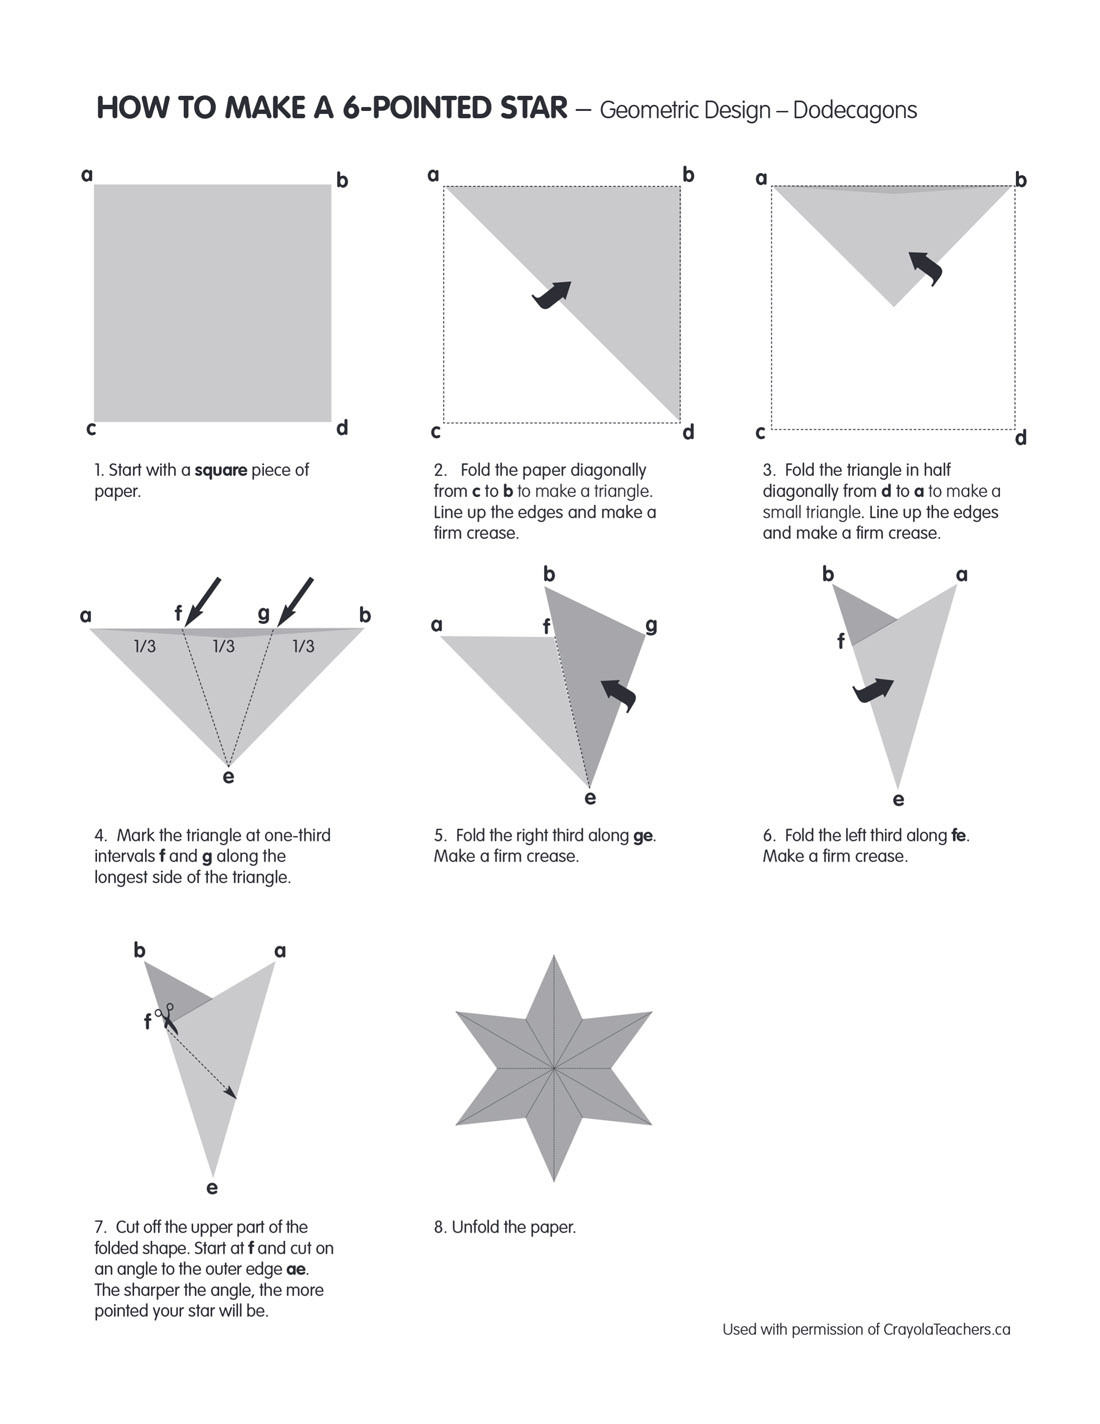 How to Make a 6-Sided Star